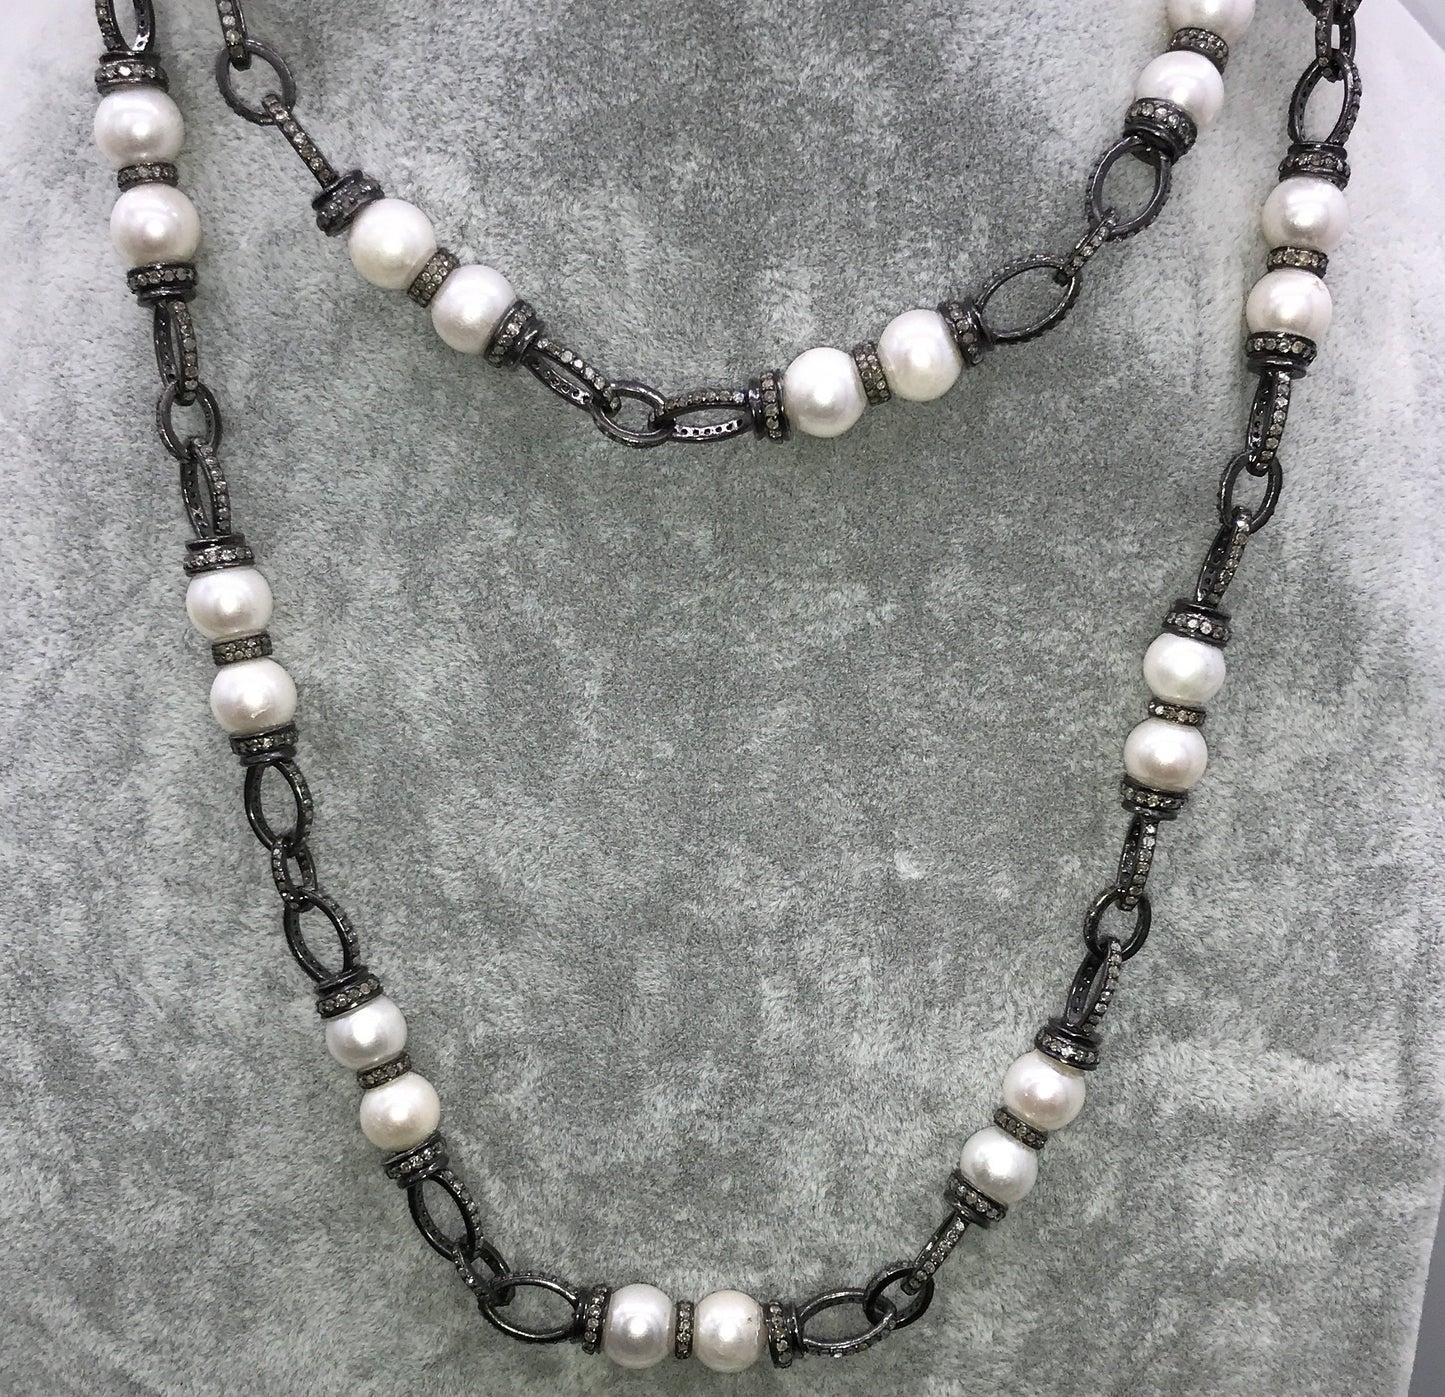 Diamond and Pearl Chain Link Necklace